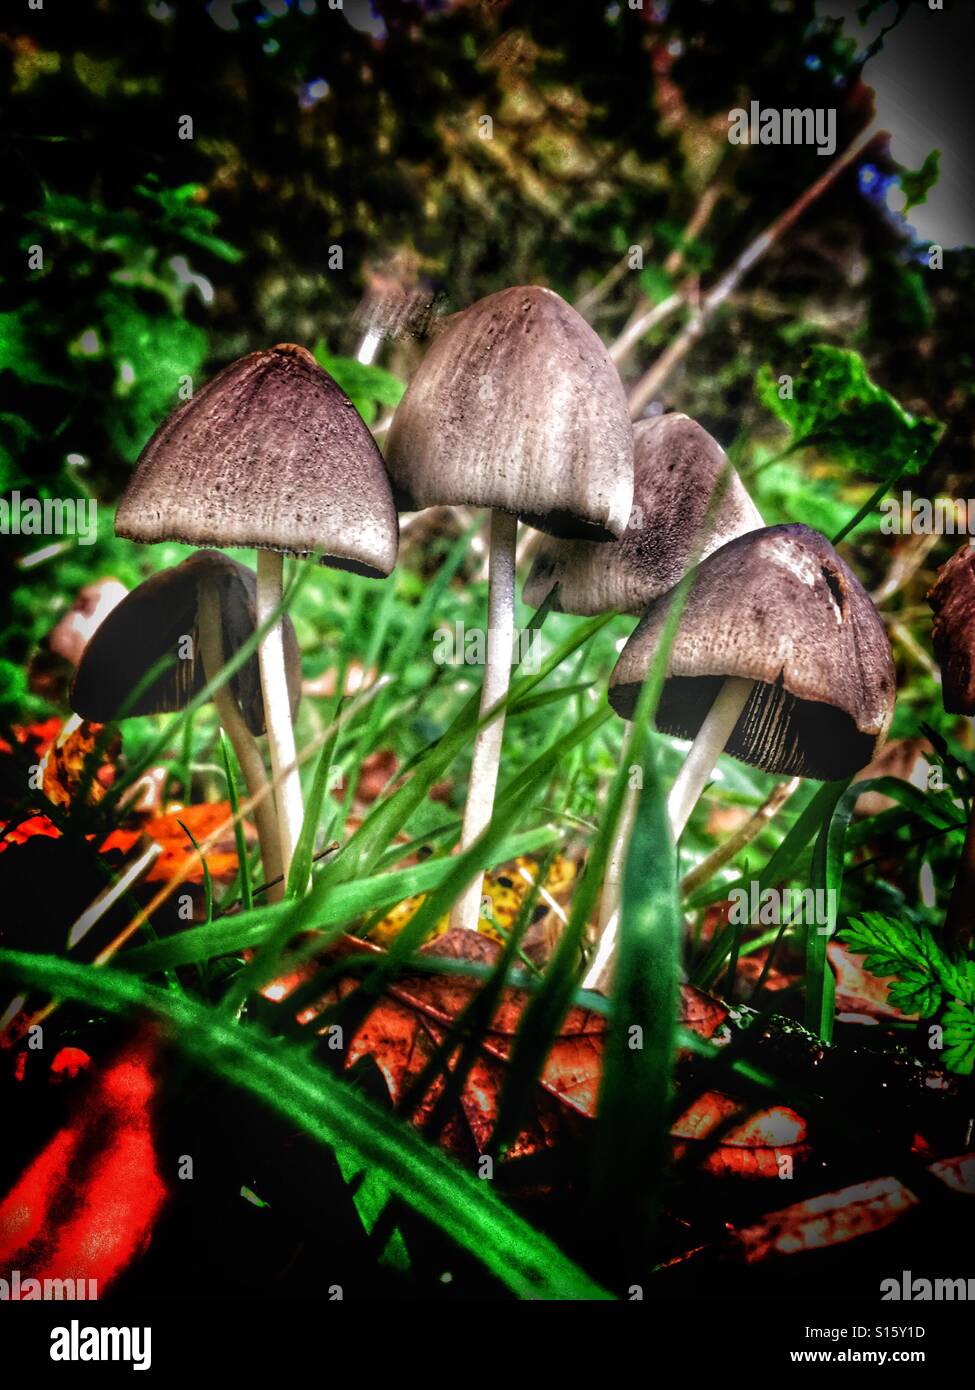 Patterns in Nature - Toadstools among grass in autumn Stock Photo